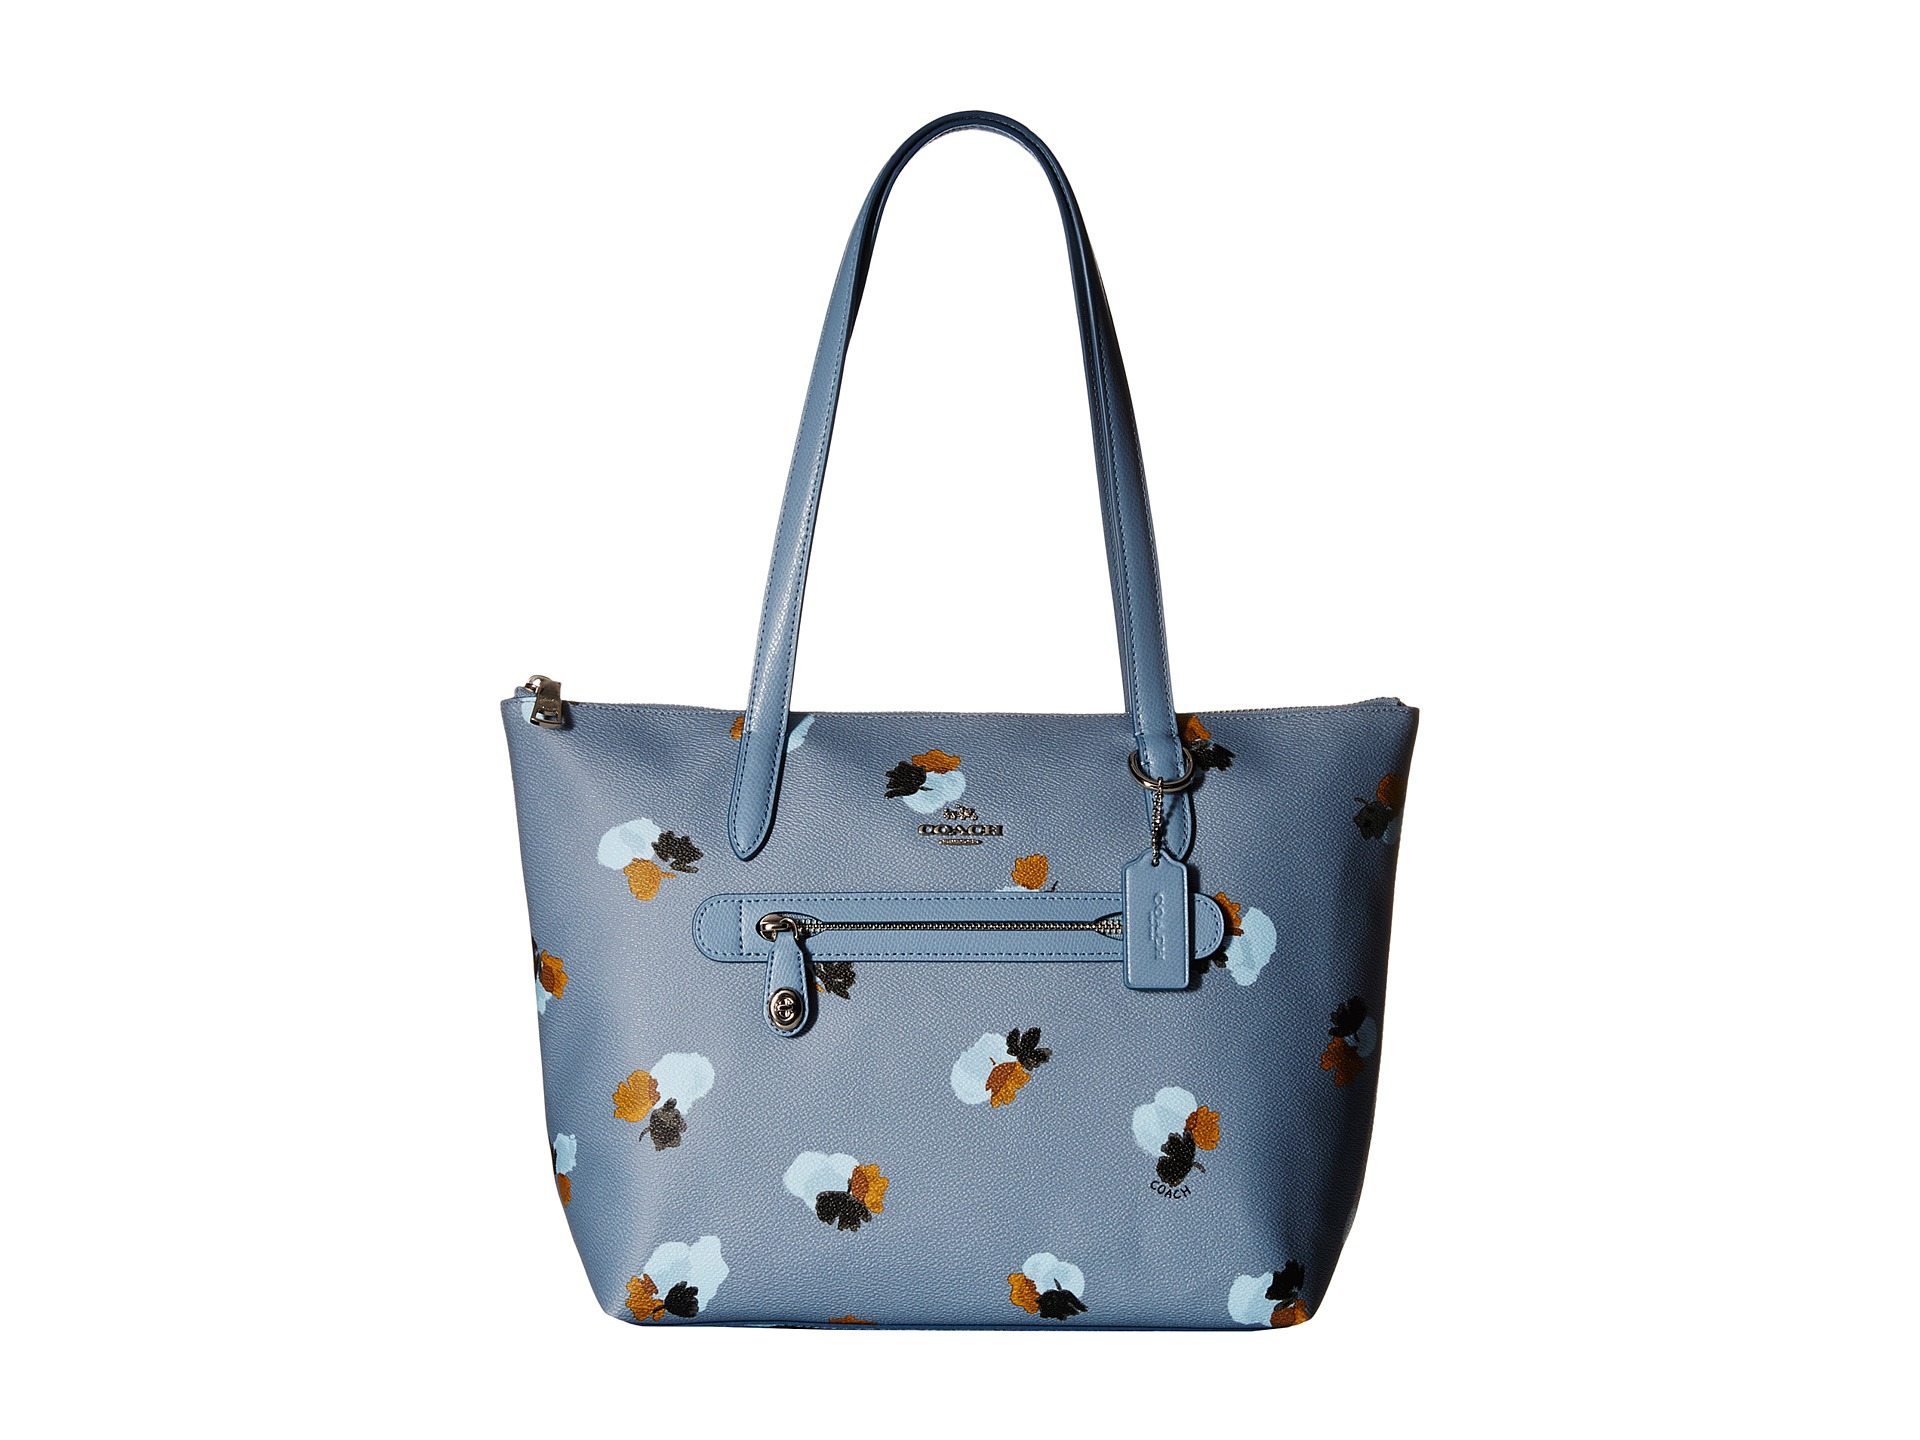 Lyst - Coach Whls Floral Printed Taylor Tote in Blue